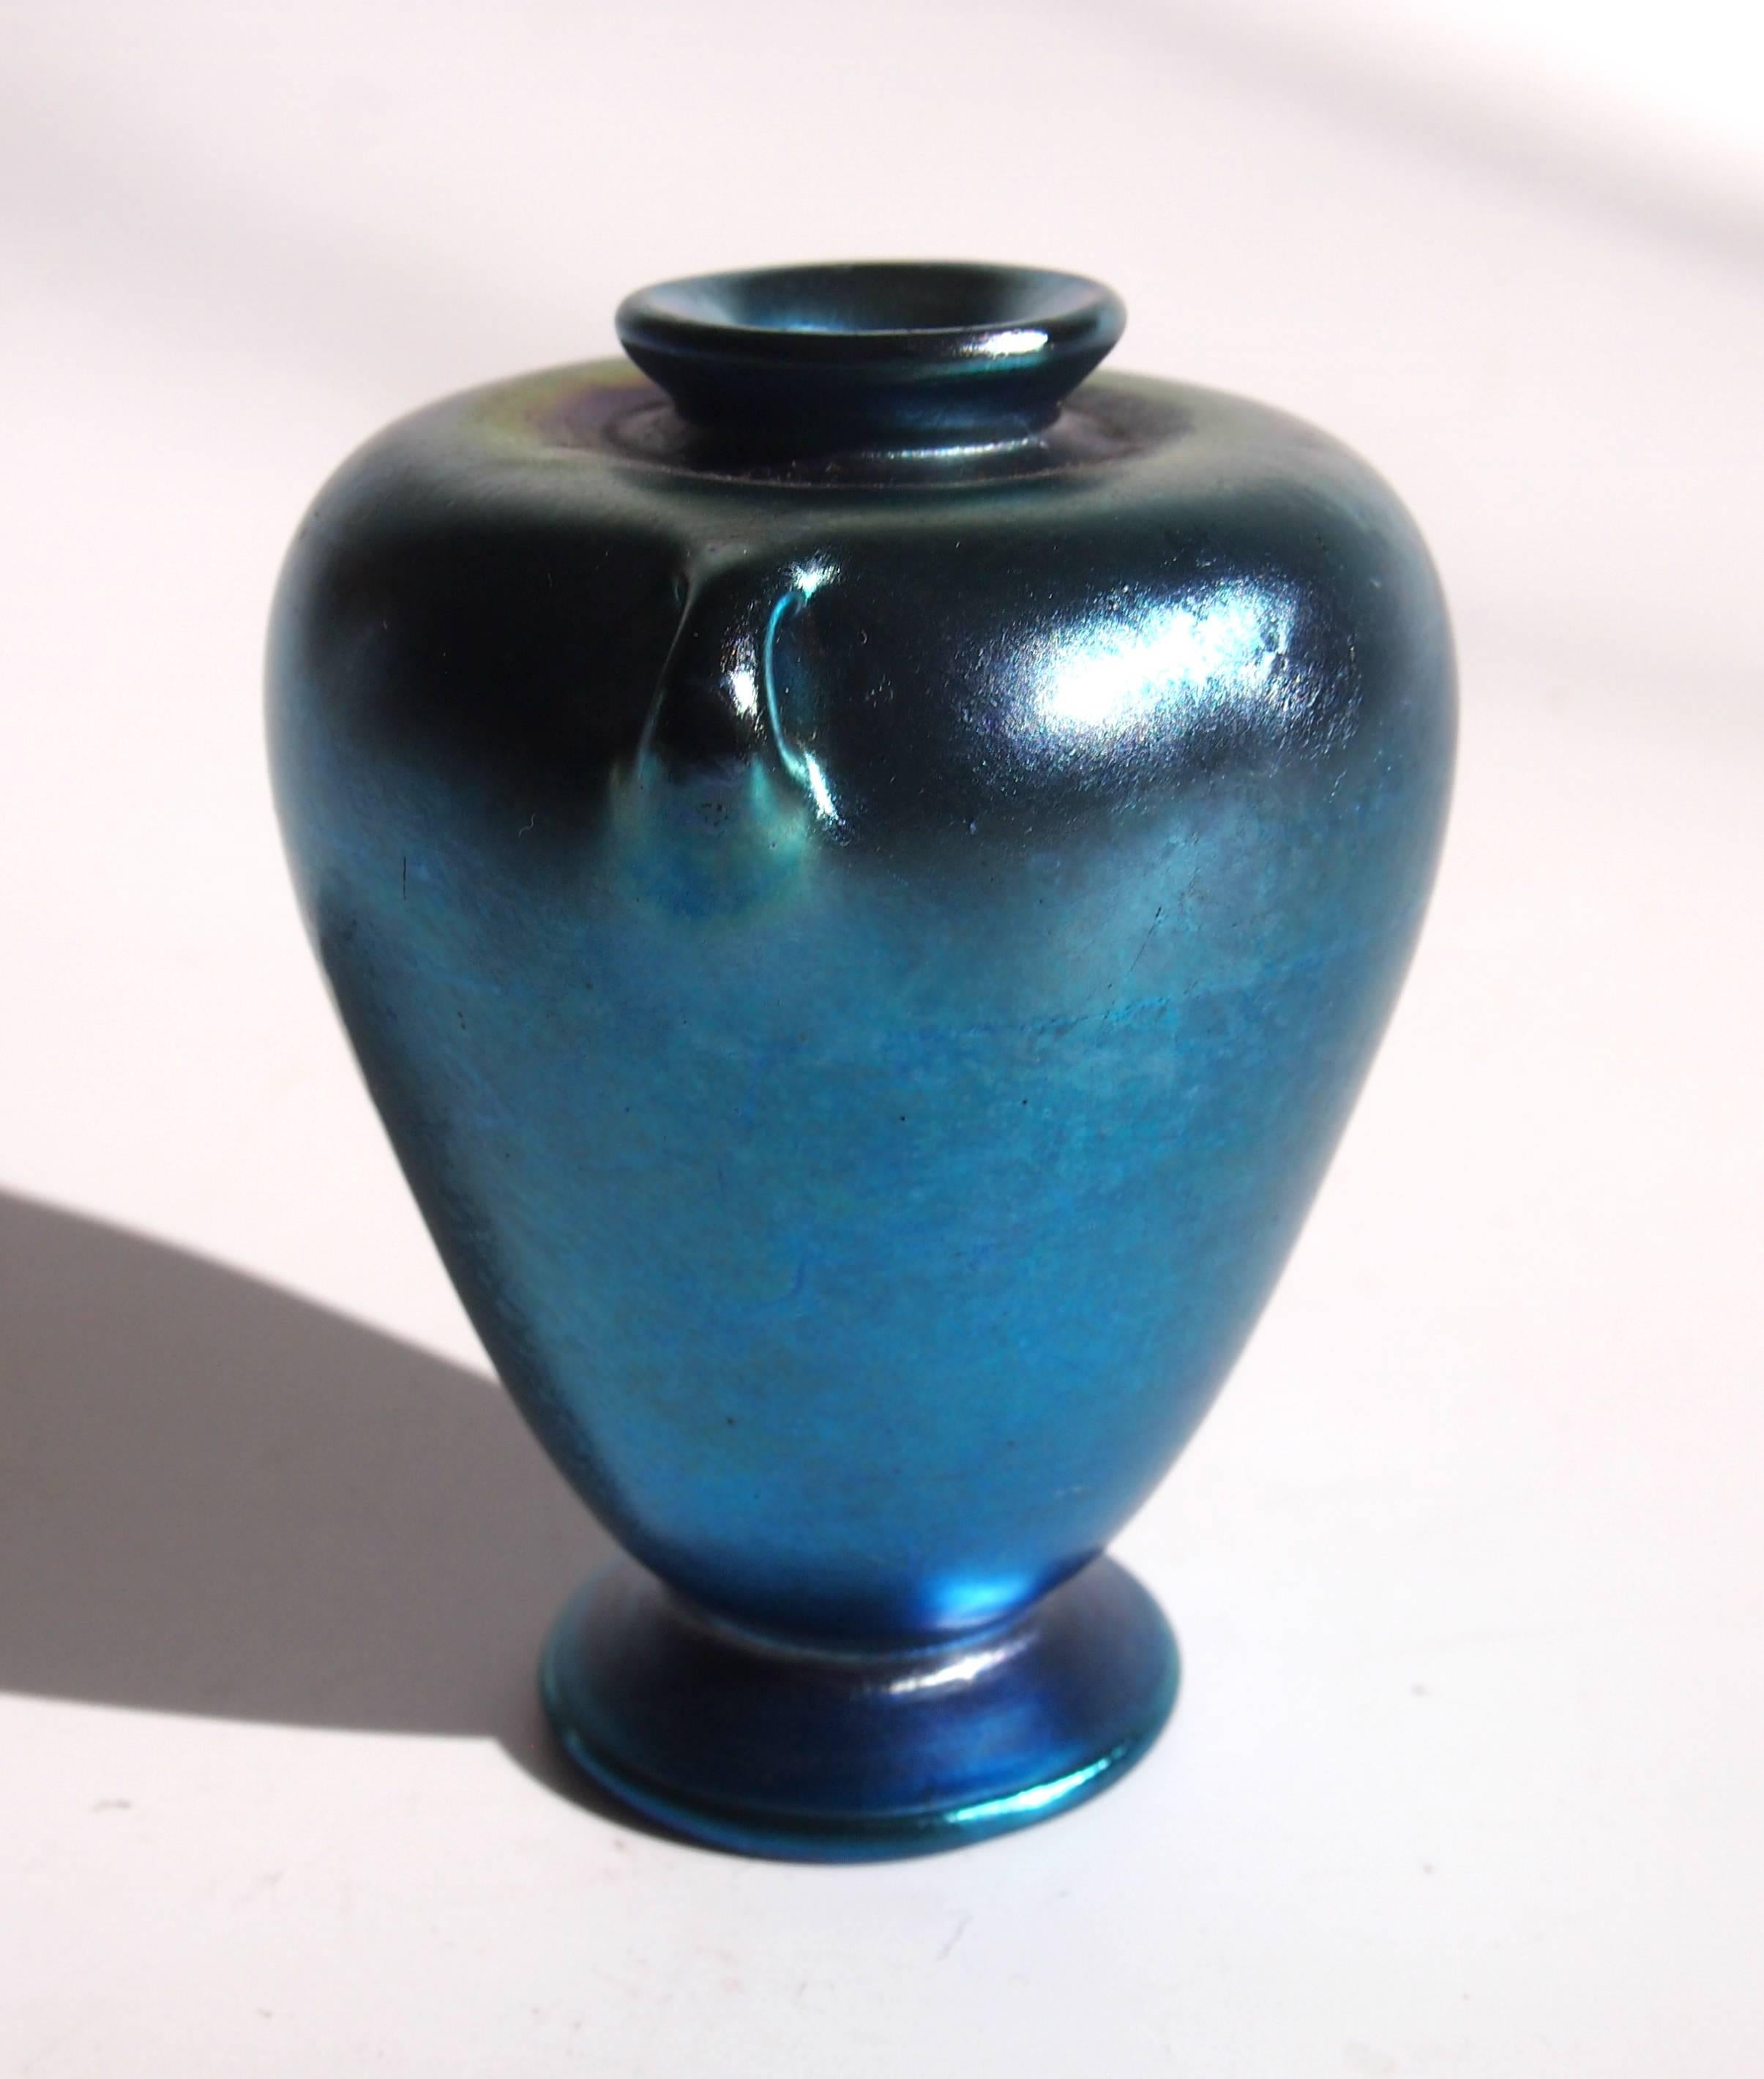 A very rare Art Nouveau Louis Comfort Tiffany blue Favrile miniature vase in the art nouveau style and shaped like a tiny footed Greek urn with two cute handles and narrow opening top. Beautifully signed 'L.C.Tiffany Inc Favrile' Then the date code